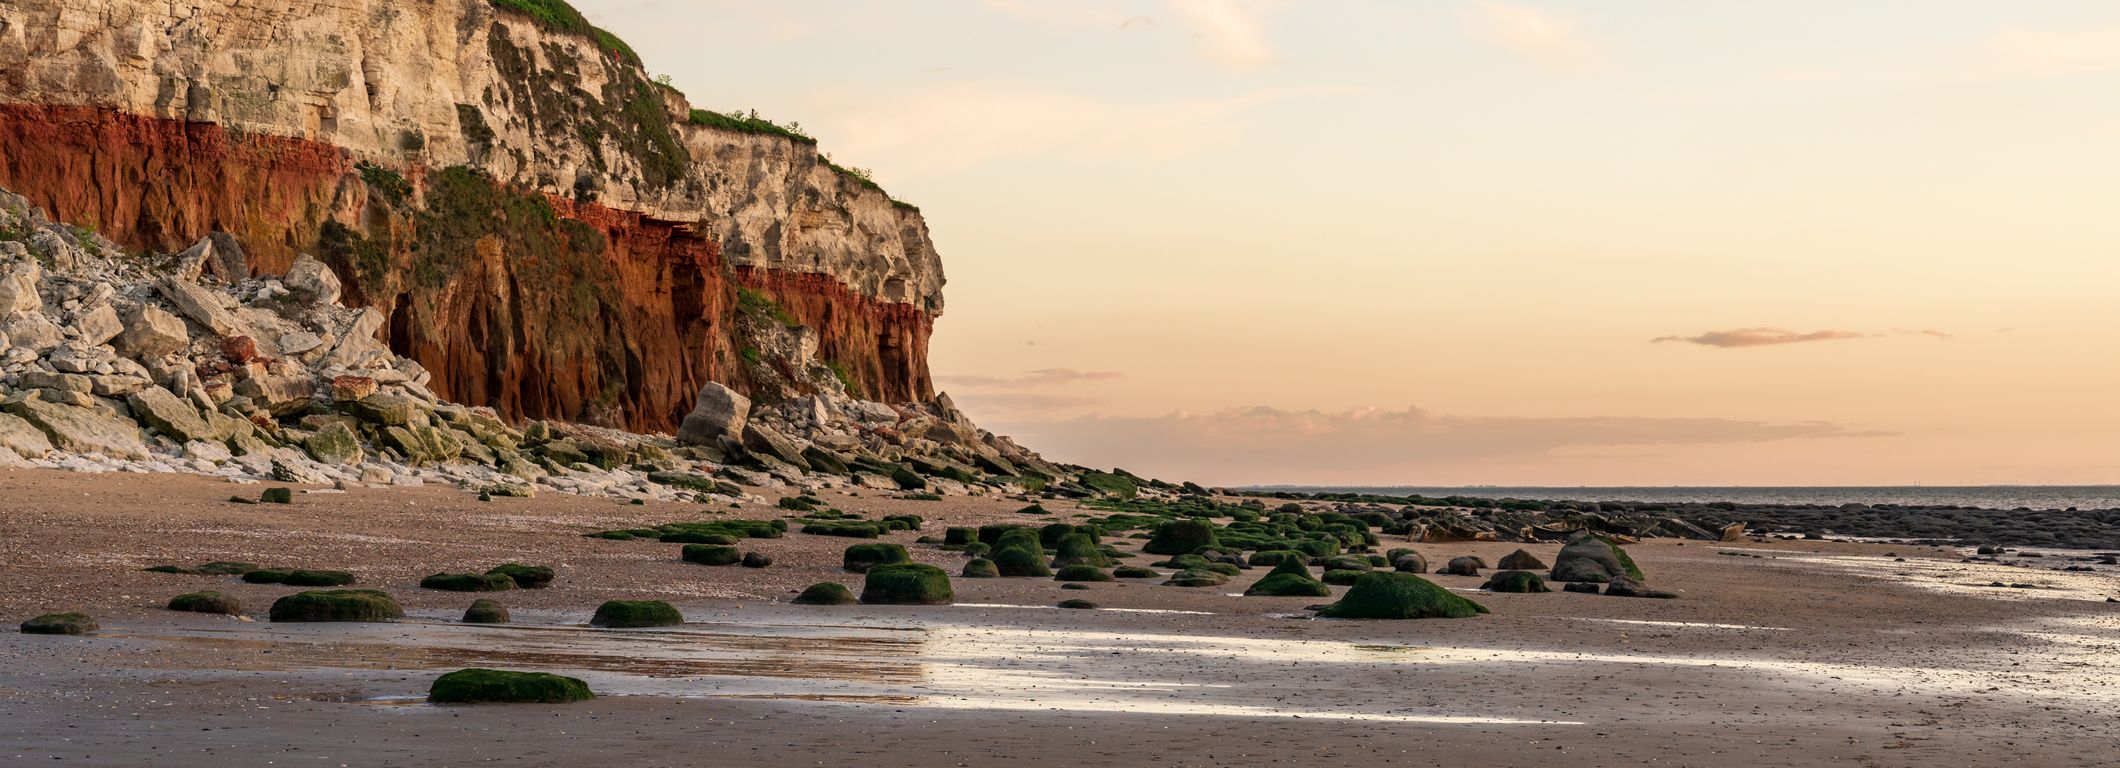 A shipwreck in the evening light at the Hunstanton Cliffs in Norfolk, England